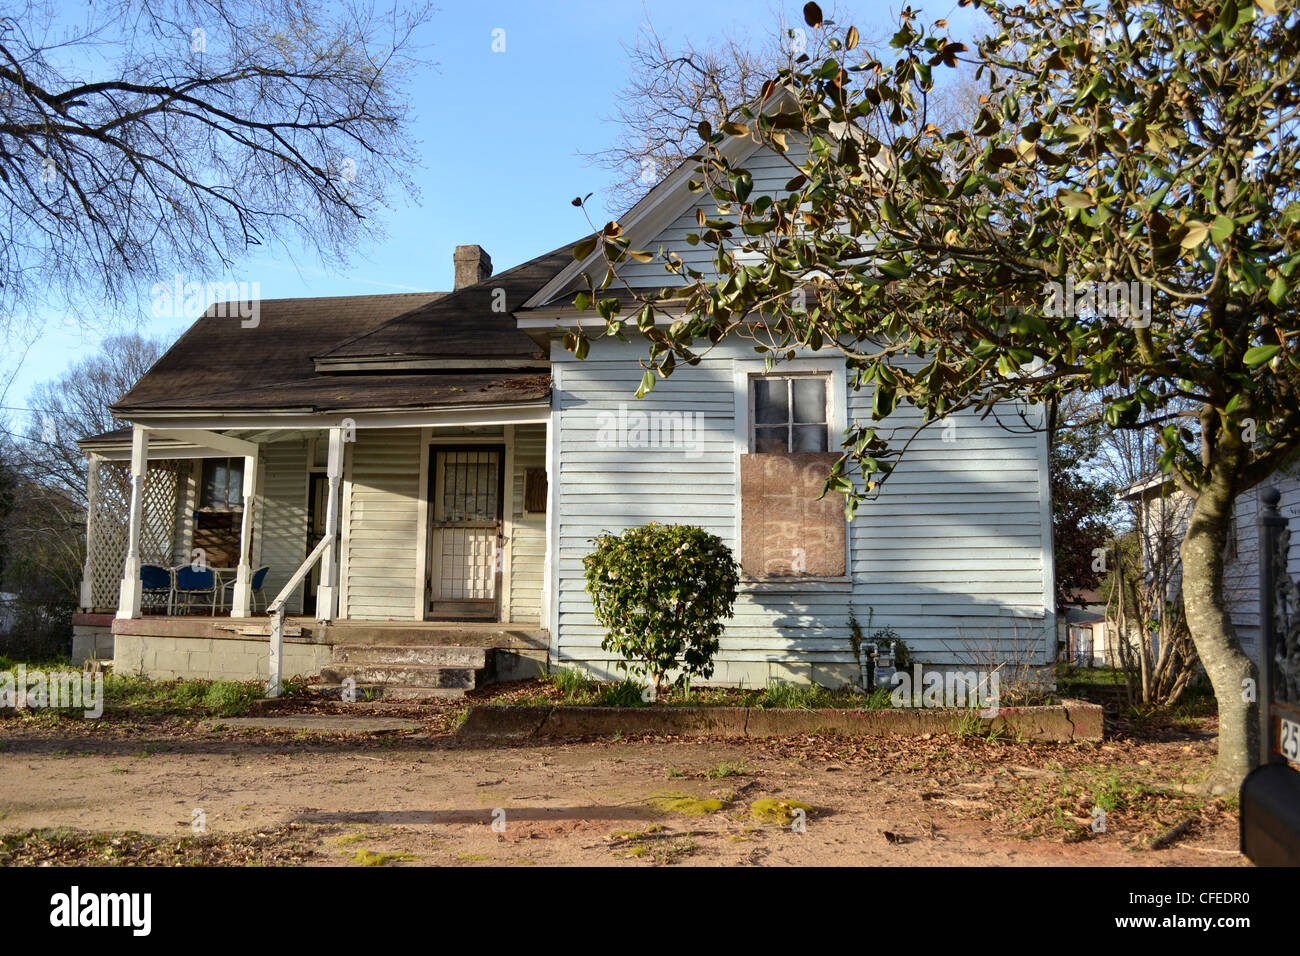 Mystical image of old, abandoned, foreclosed home in the American south. Stock Photo